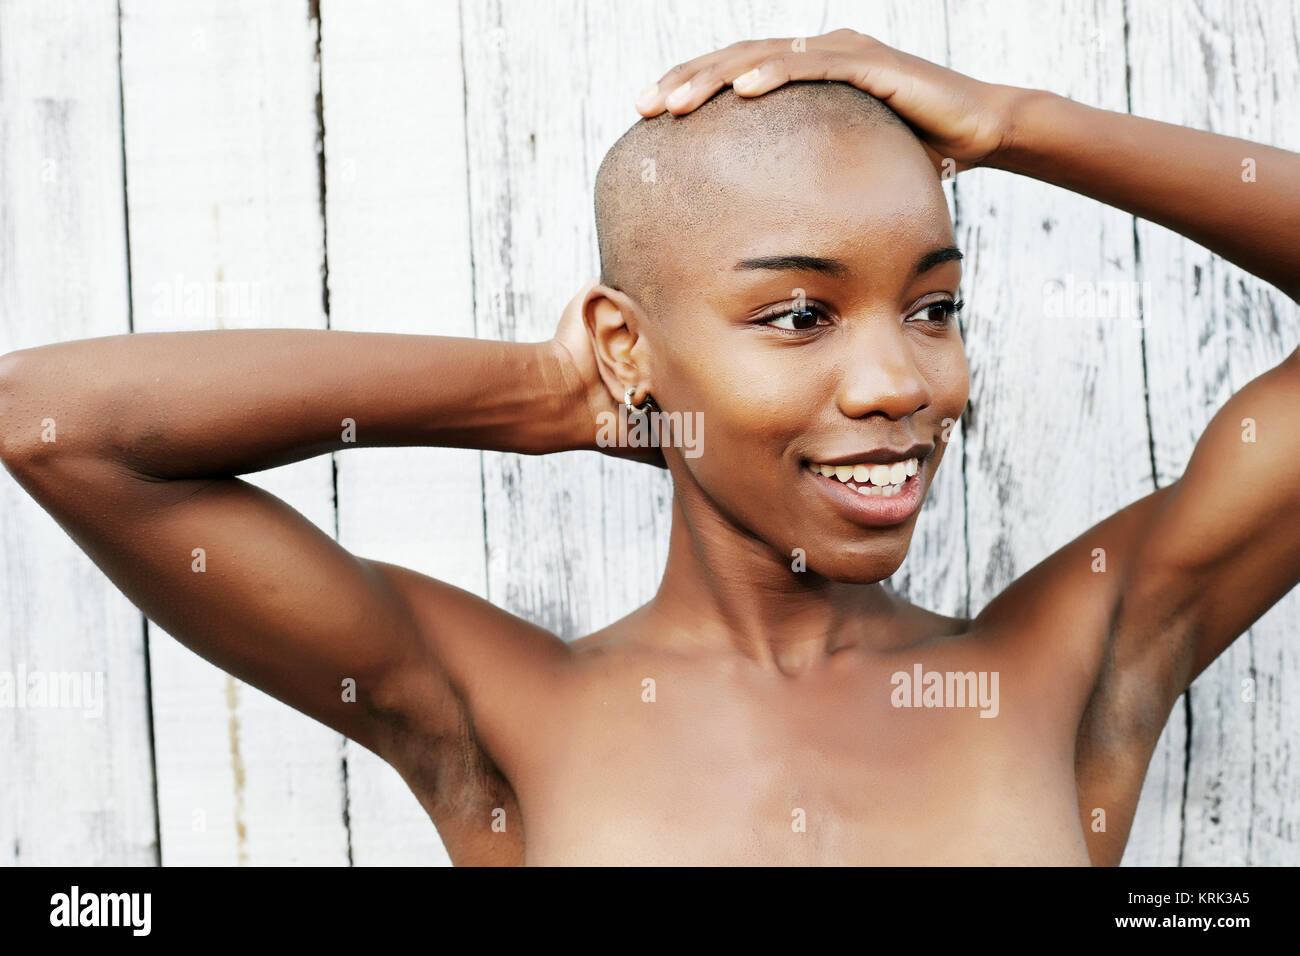 Close up of naked black woman rubbing bald head Stock Photo